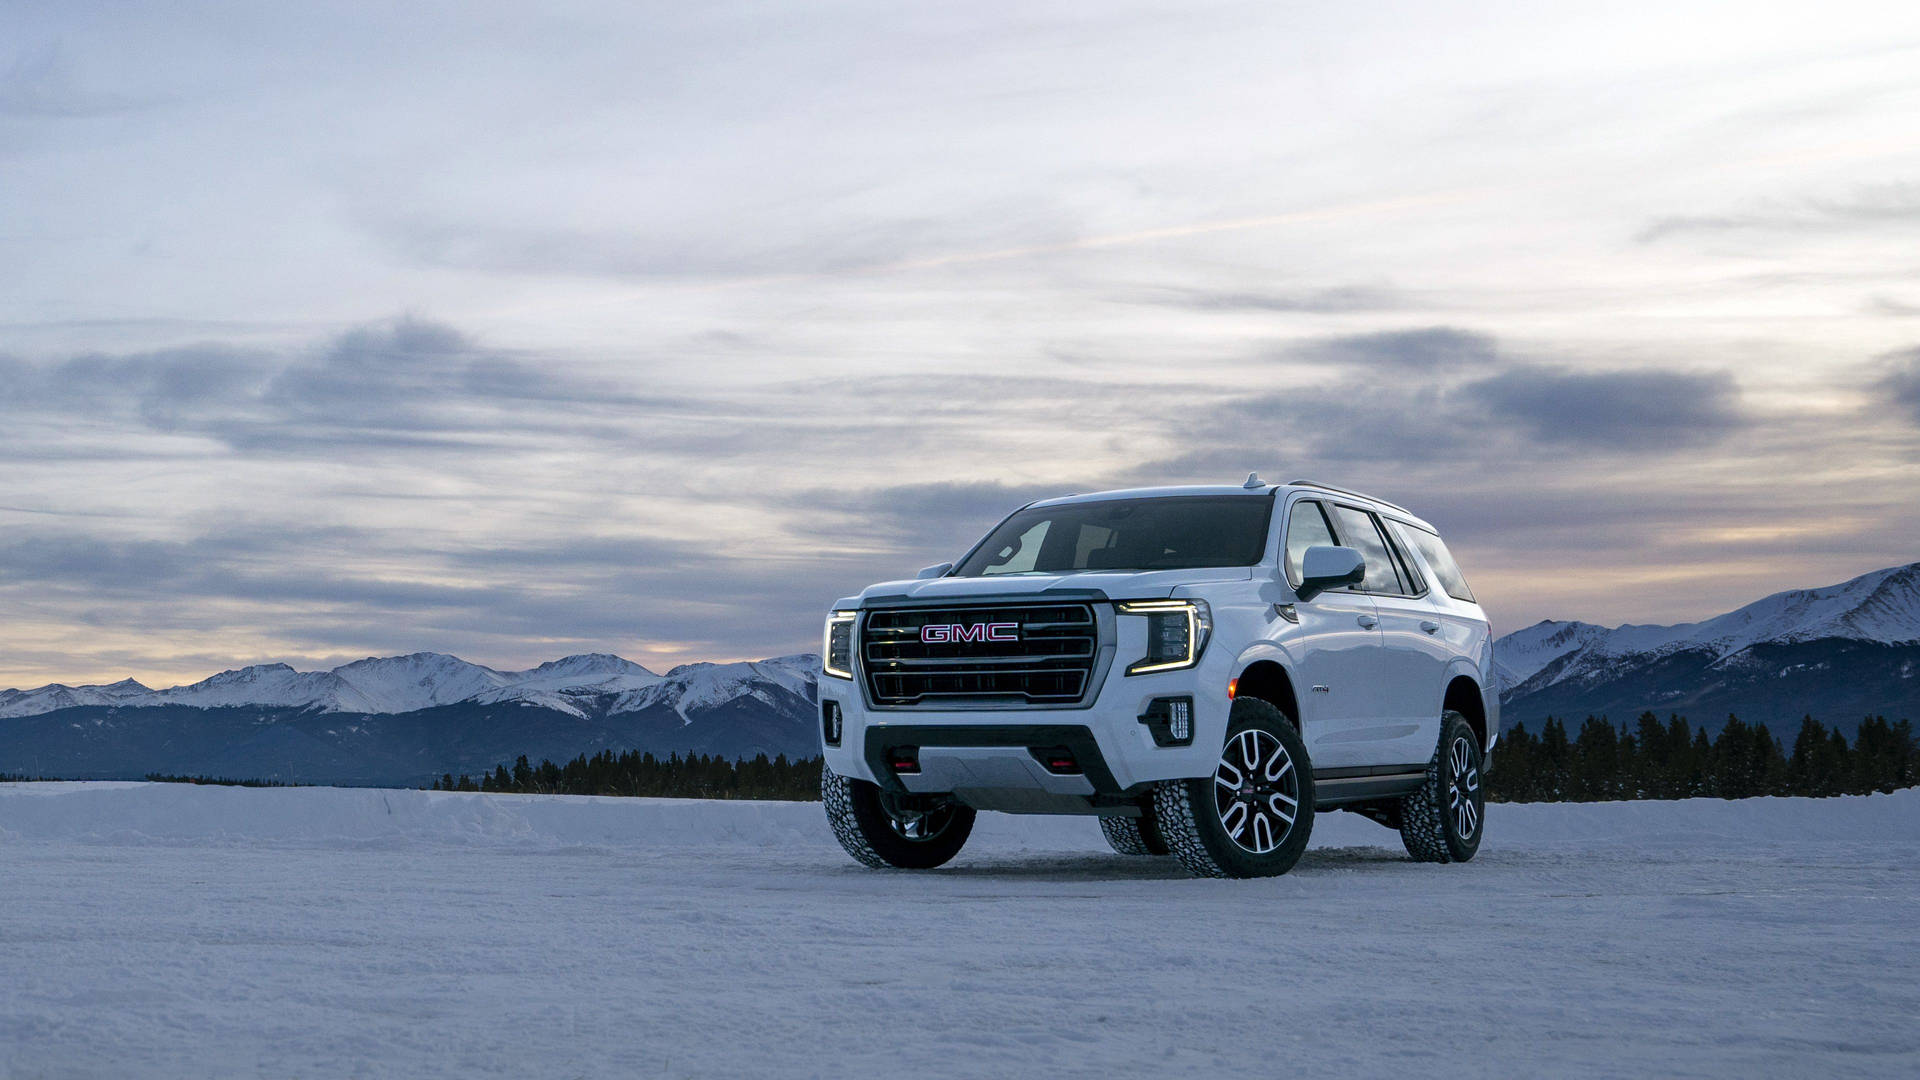 Gmc Yukon In An Icy Place